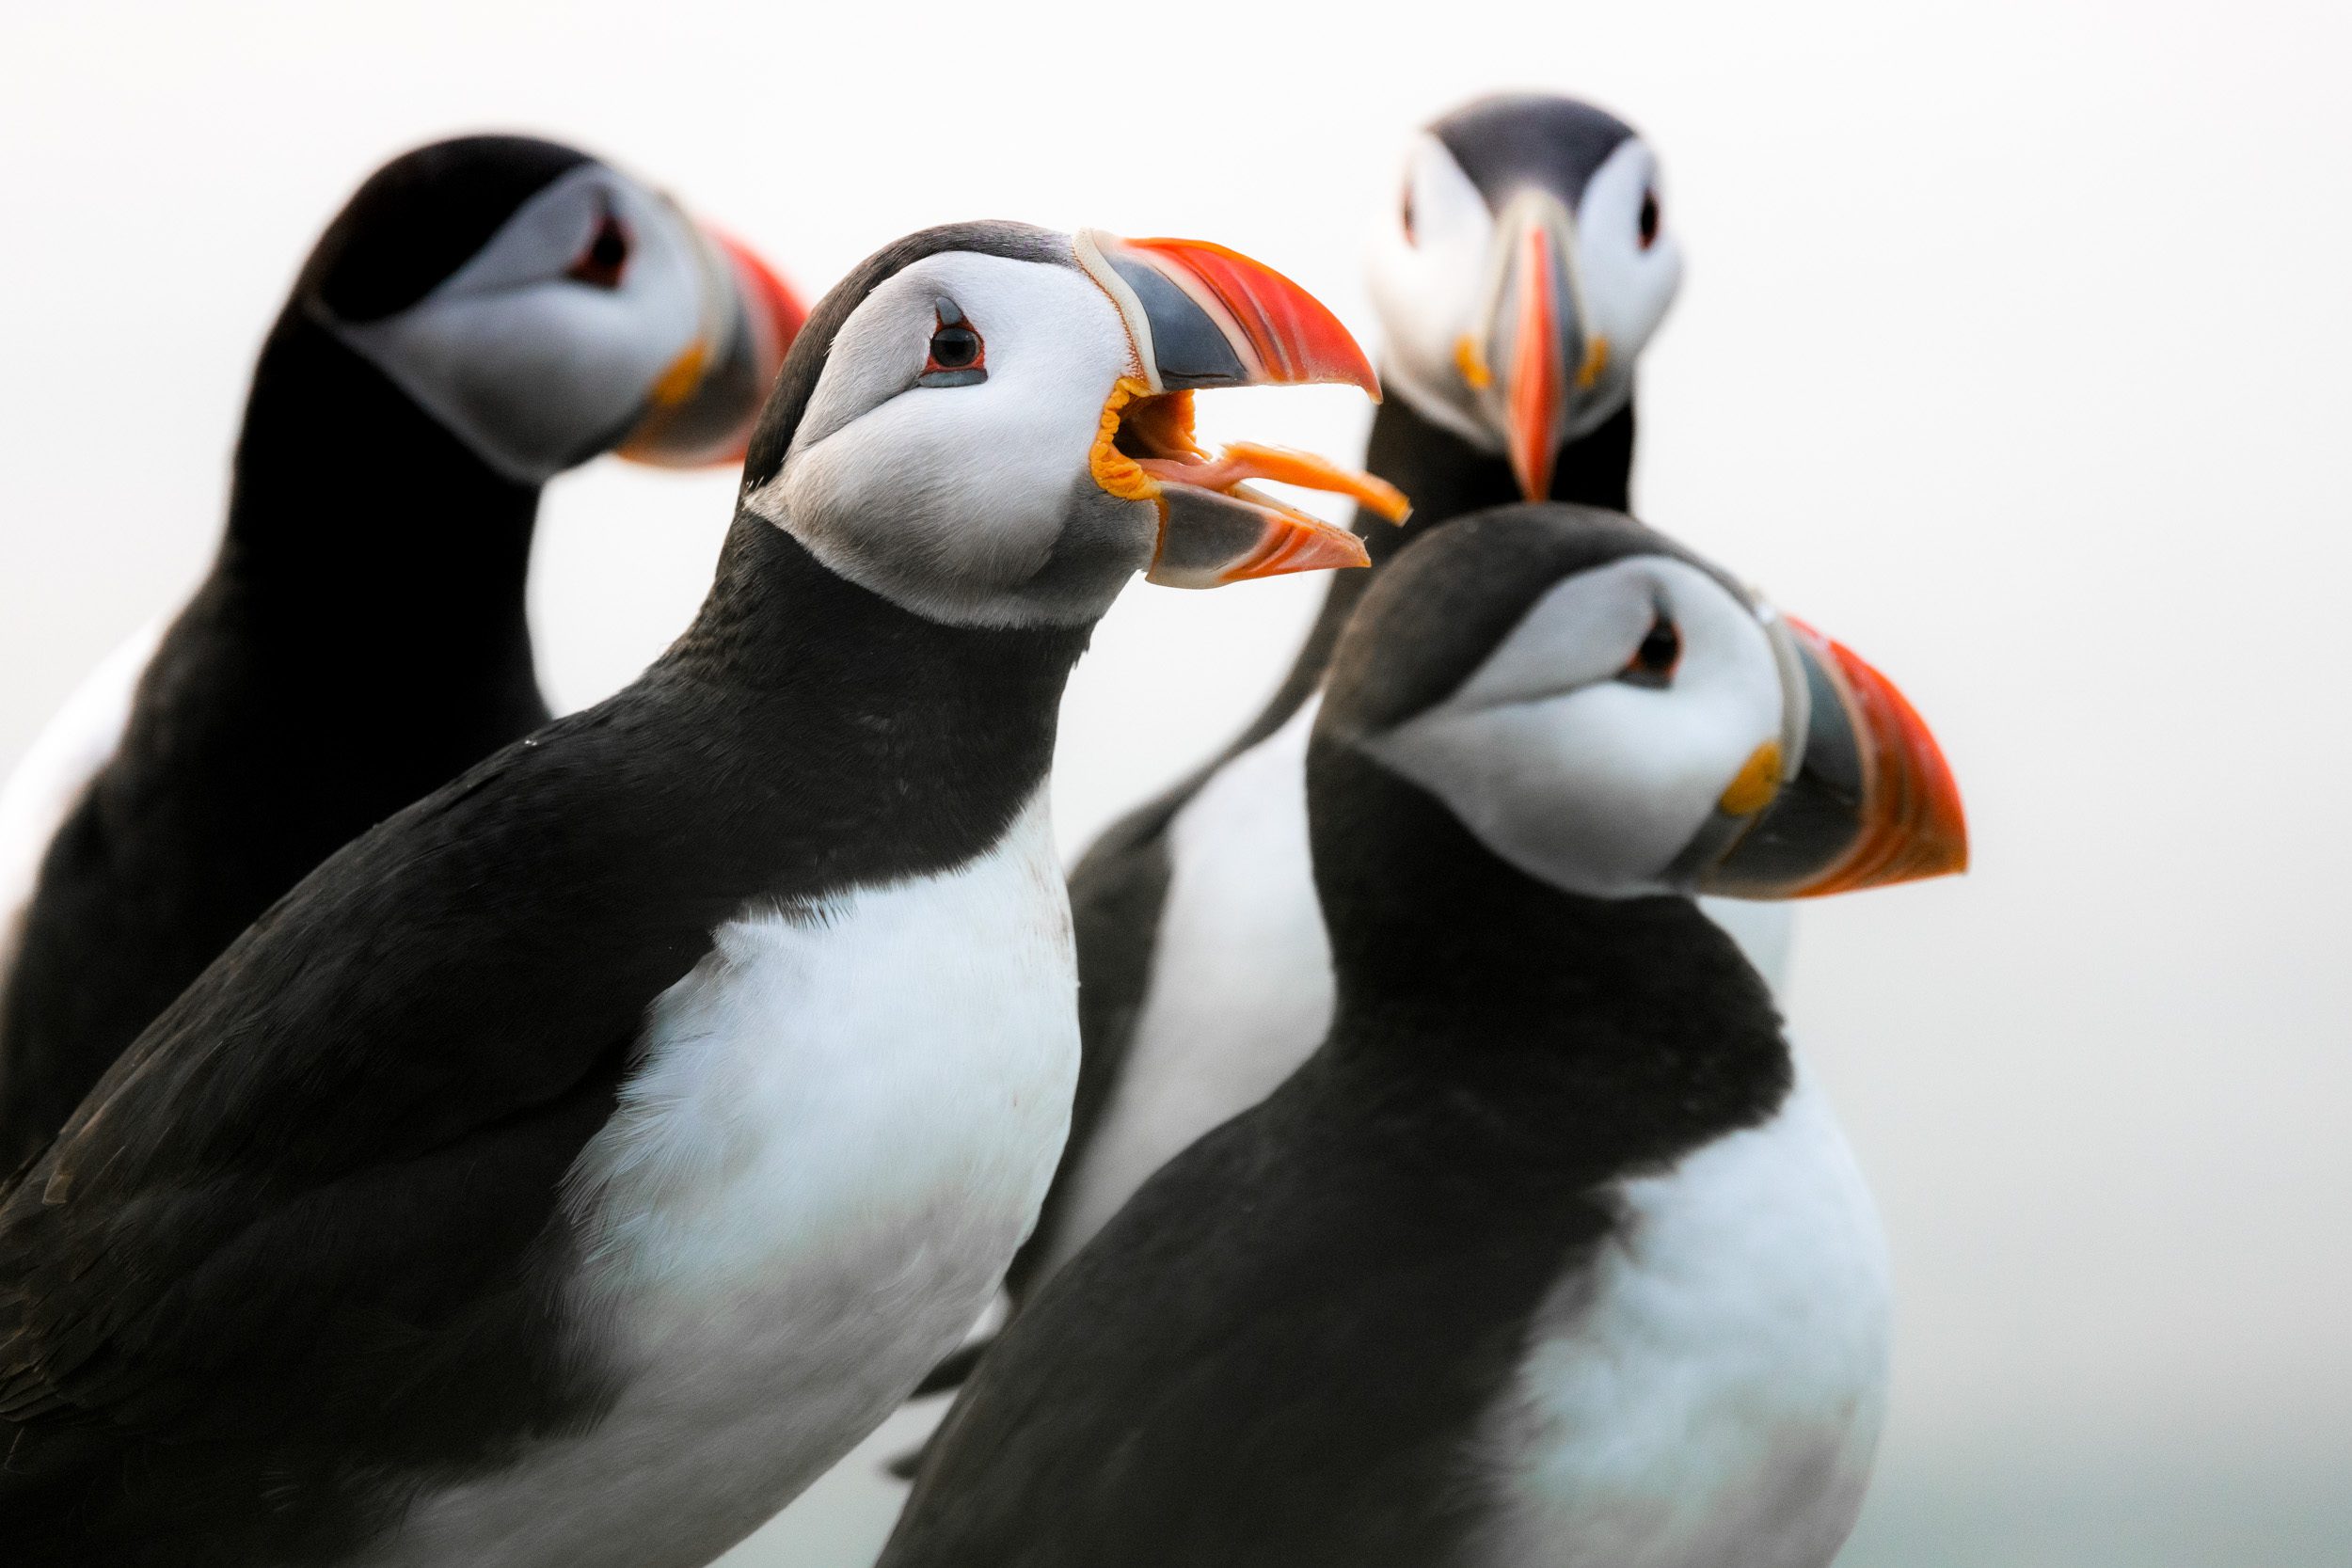 Grímsey - a Puffin Paradise on the Arctic Circle